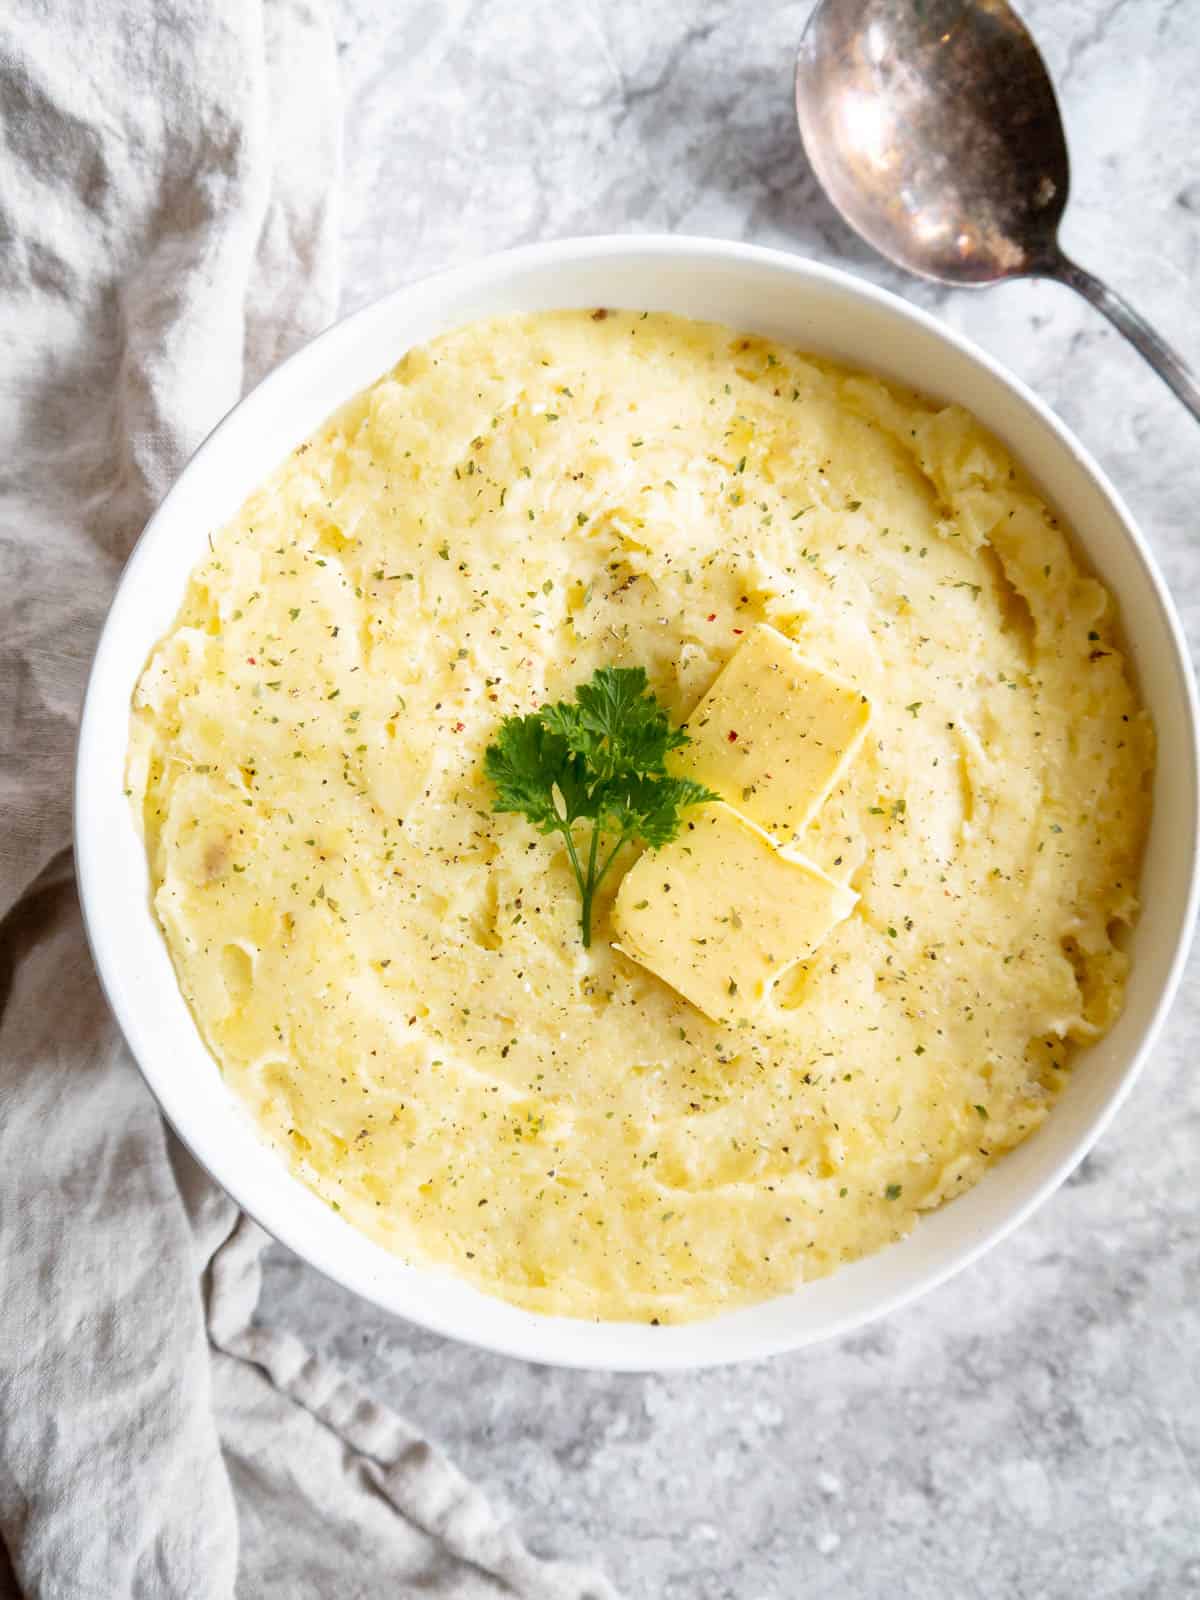 Smooth mashed potatoes with cottage cheese in a bowl.